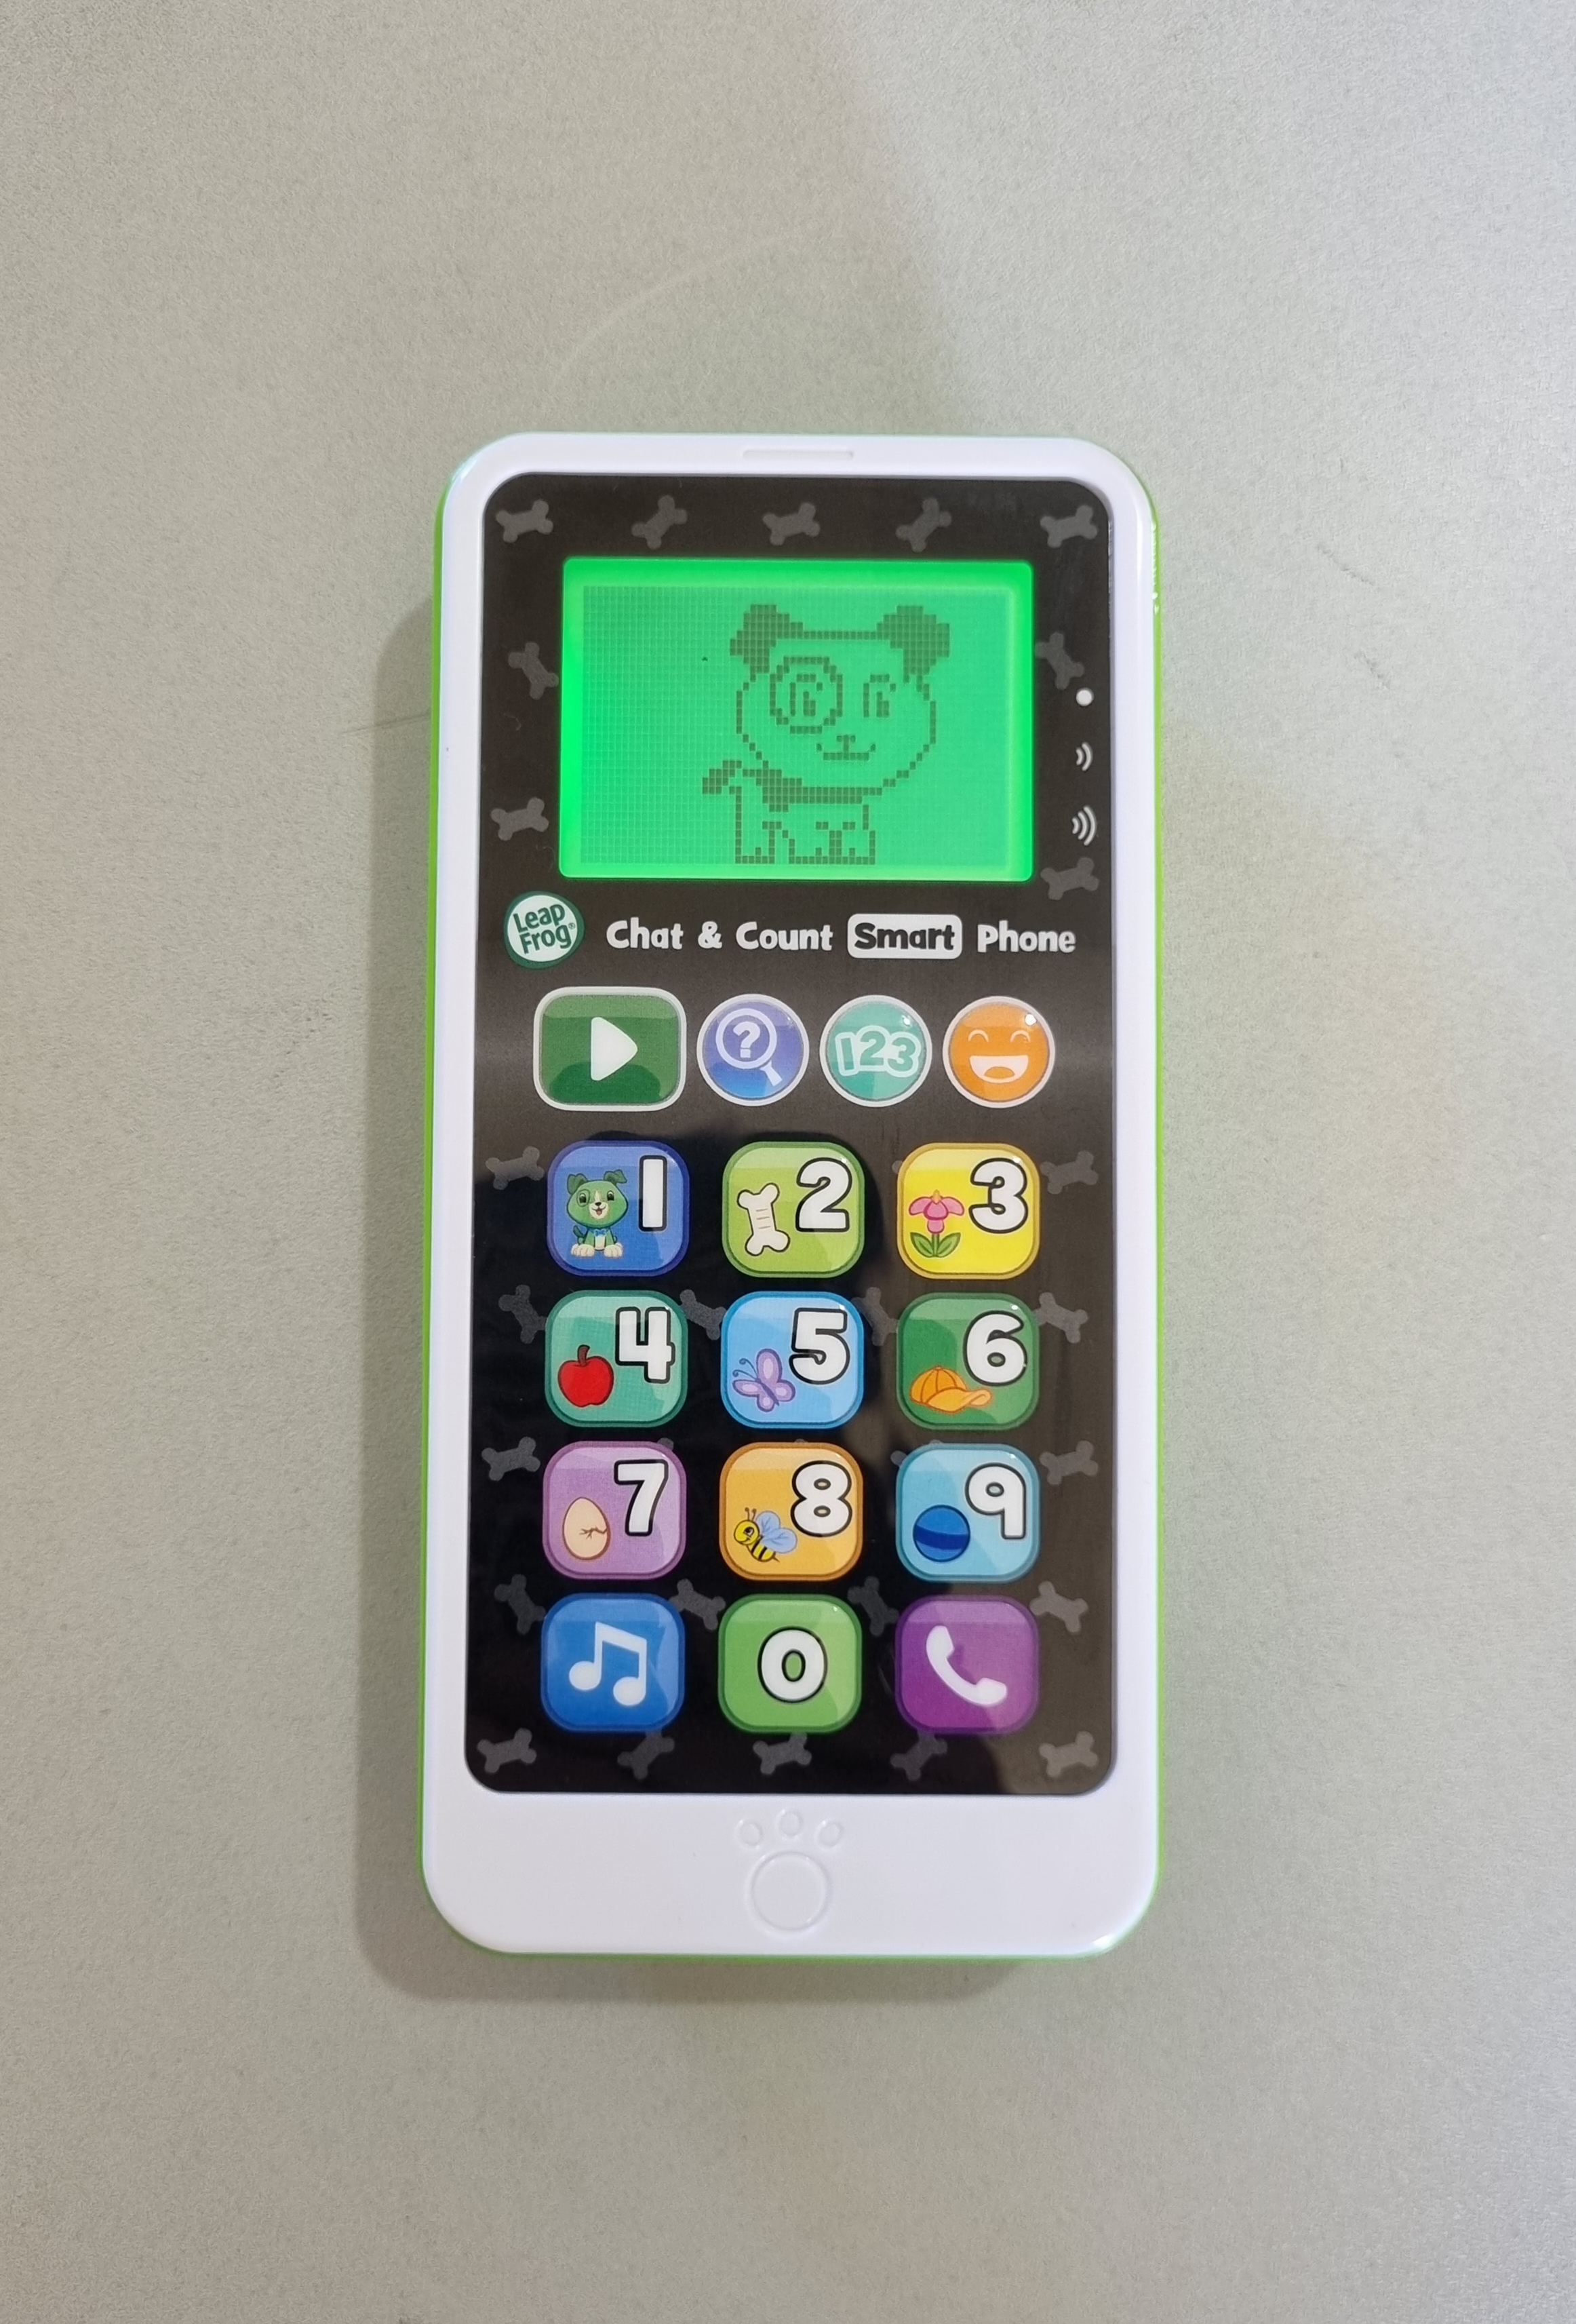 Leap Frog Chat & Count Smart Phone photo